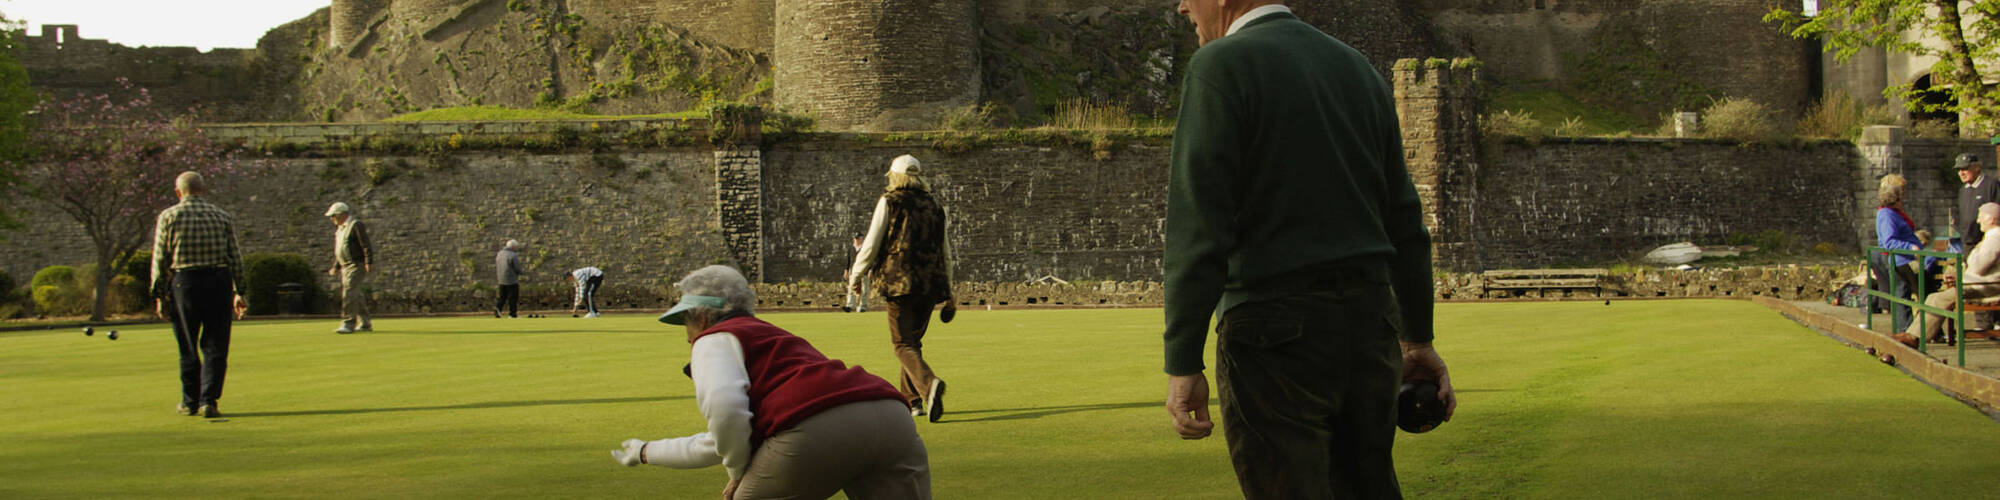 Activities Players on Bowling Green Conwy Castle Conwy